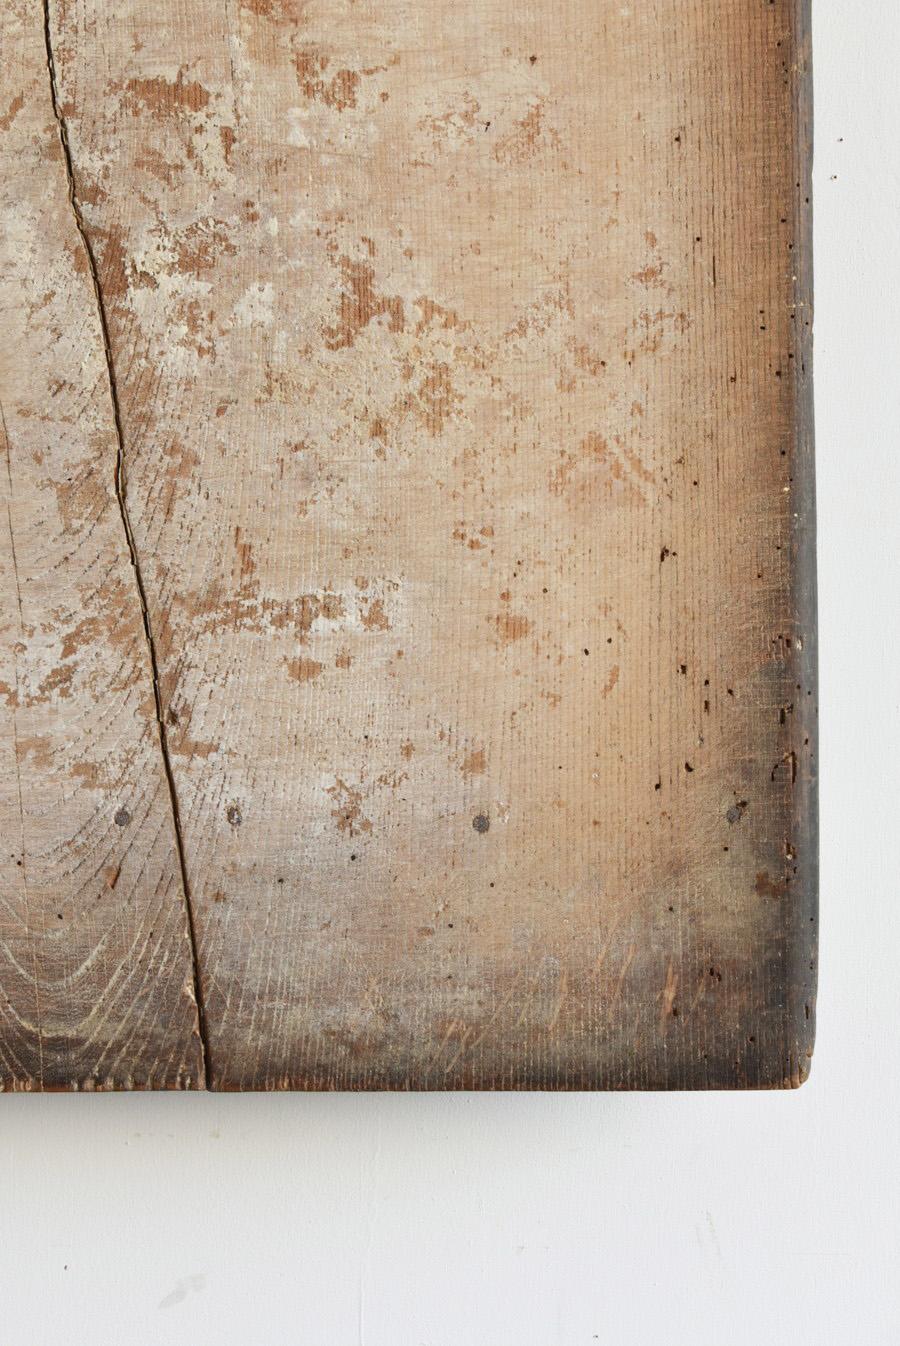 19th Century Japanese Antique Wooden Board 1860s-1900 / Wabi Sabi Abstract Art / Wall Hanging